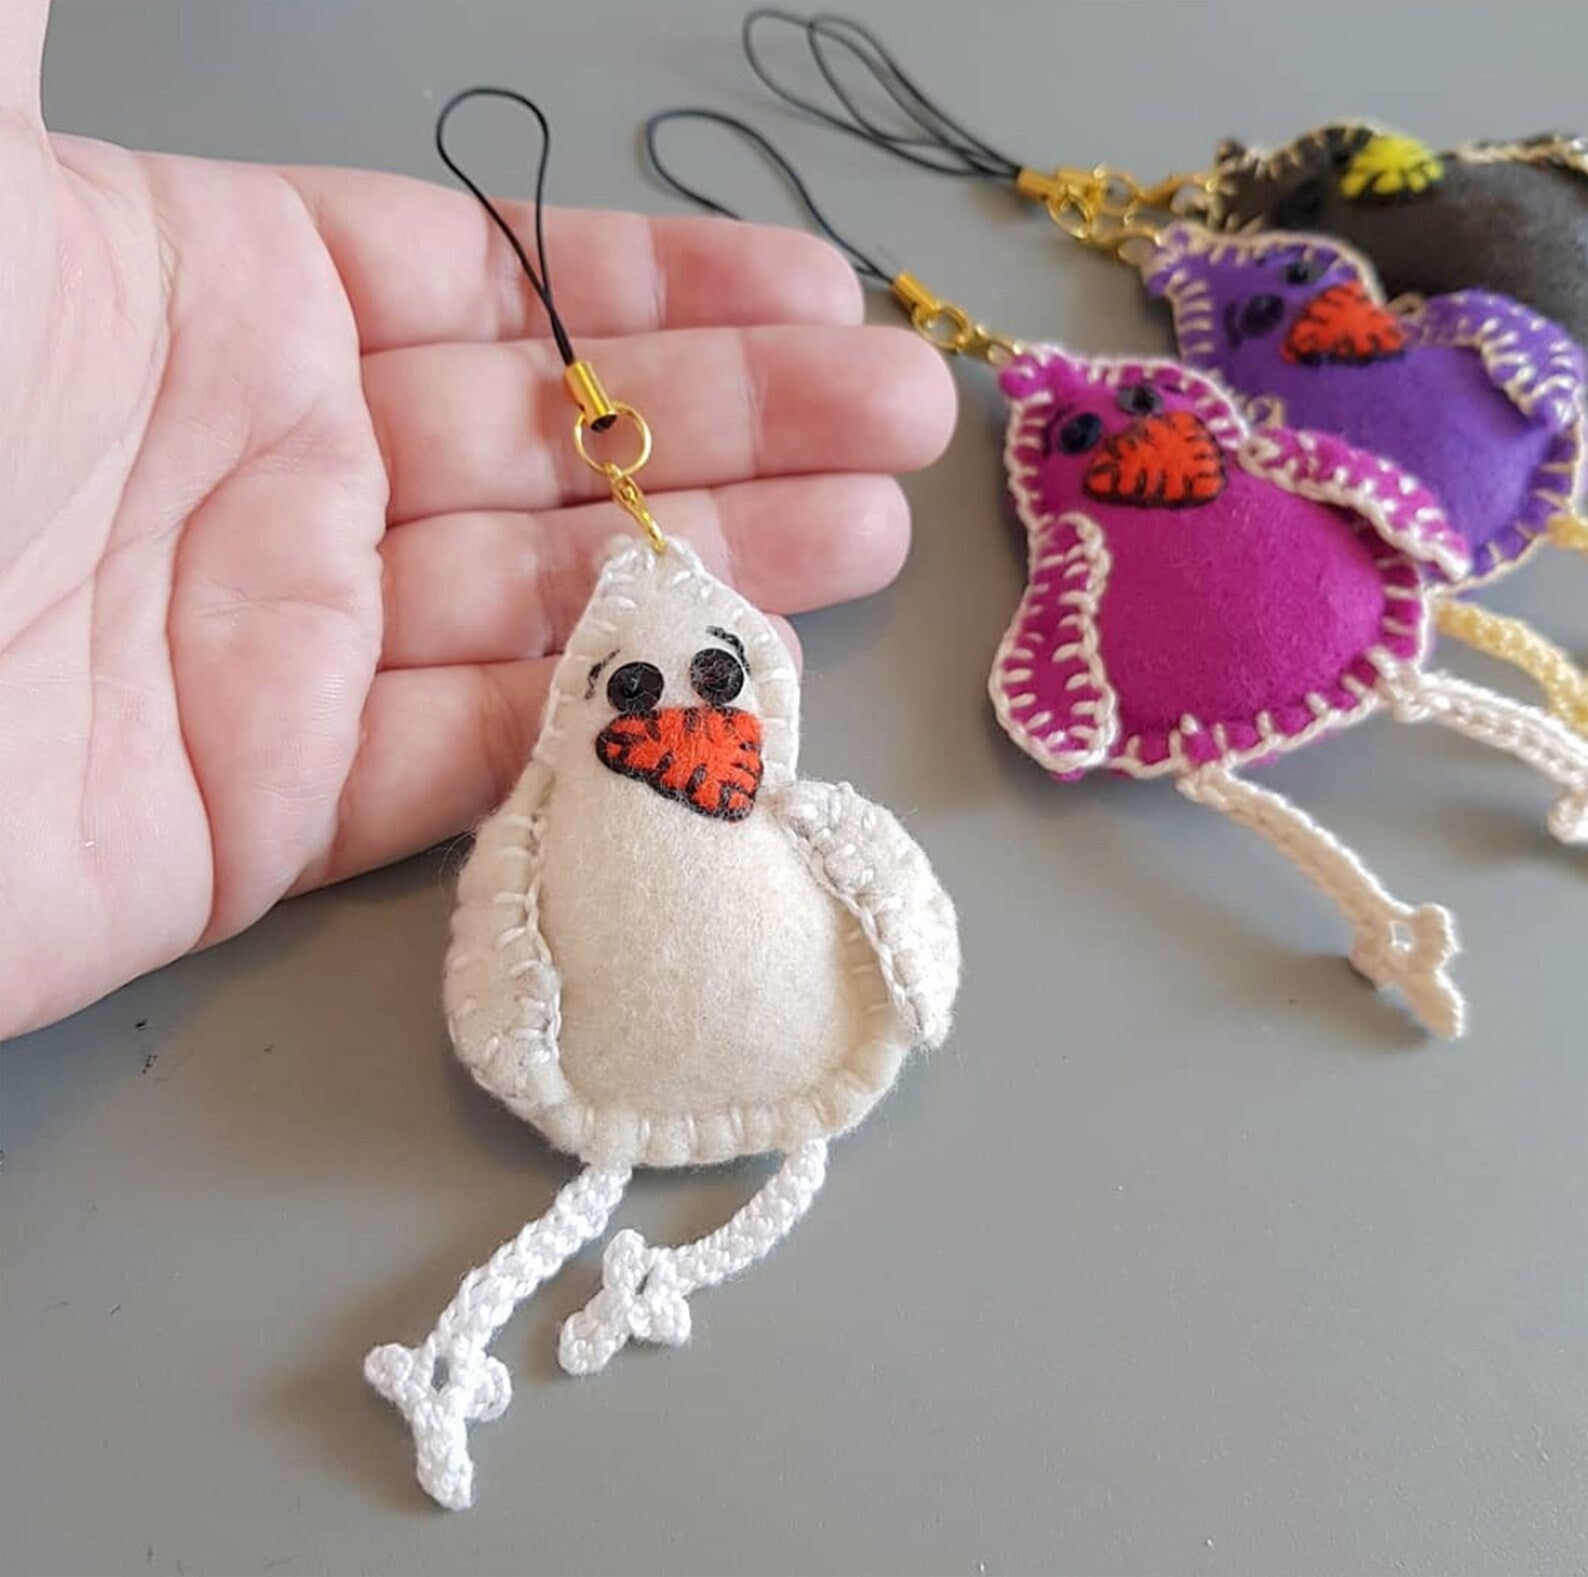 "Share the love of nature with CocoFlower's delightful Felt Bird companion."